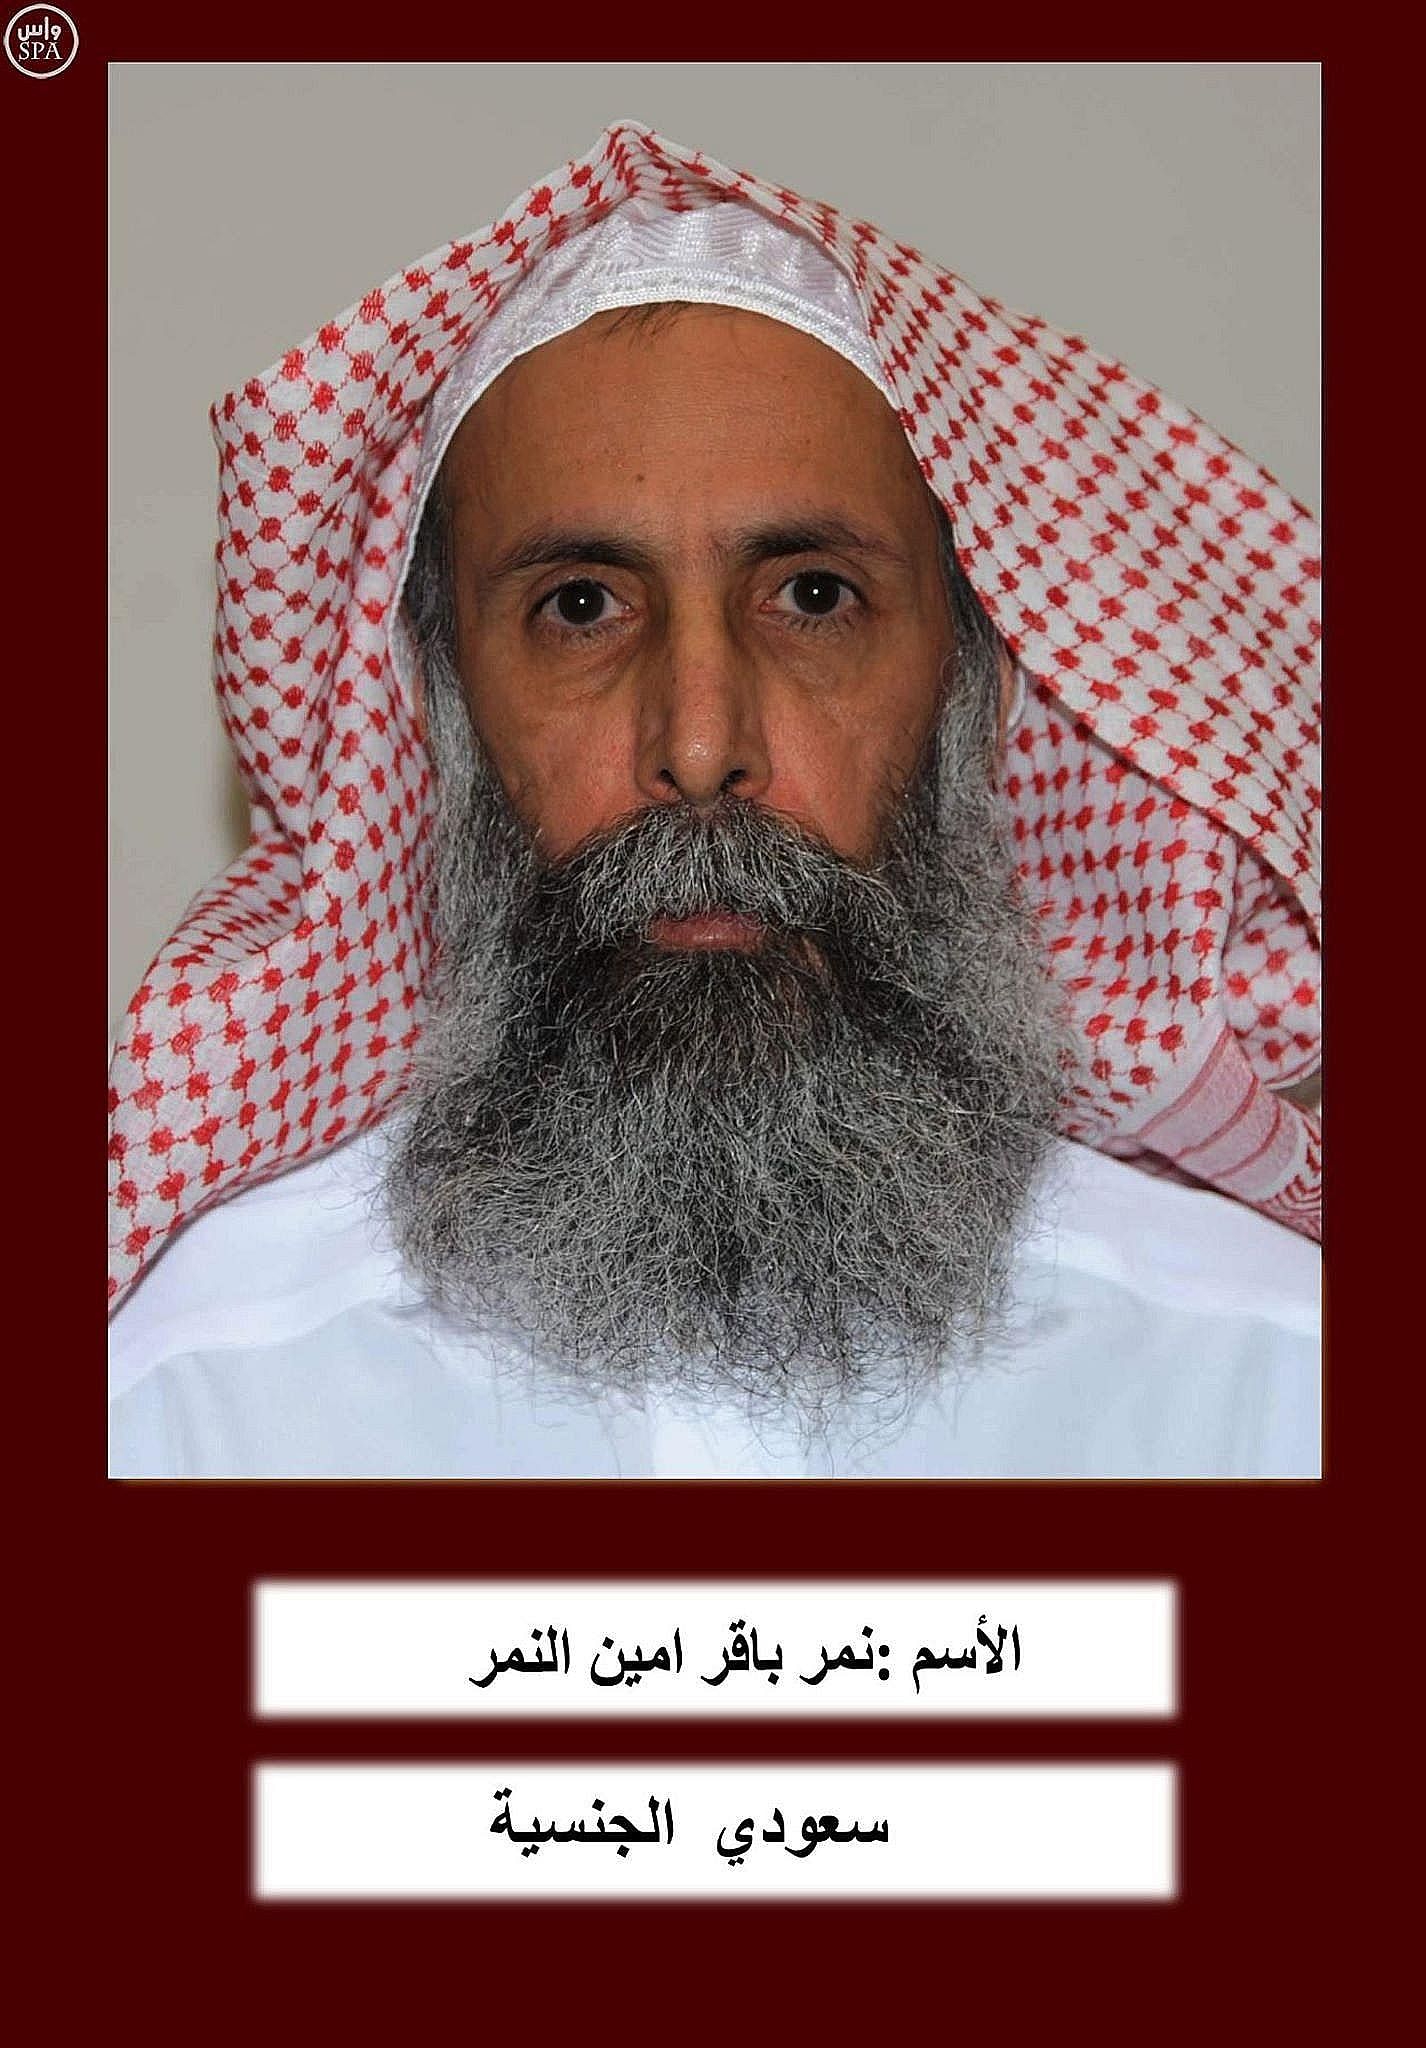 The Saudi authorities arrested Shi'ite cleric Nimr al-Nimr in July 2012, while the kingdom was leading a regional push to end the pro-democratic activism of the Arab Spring.